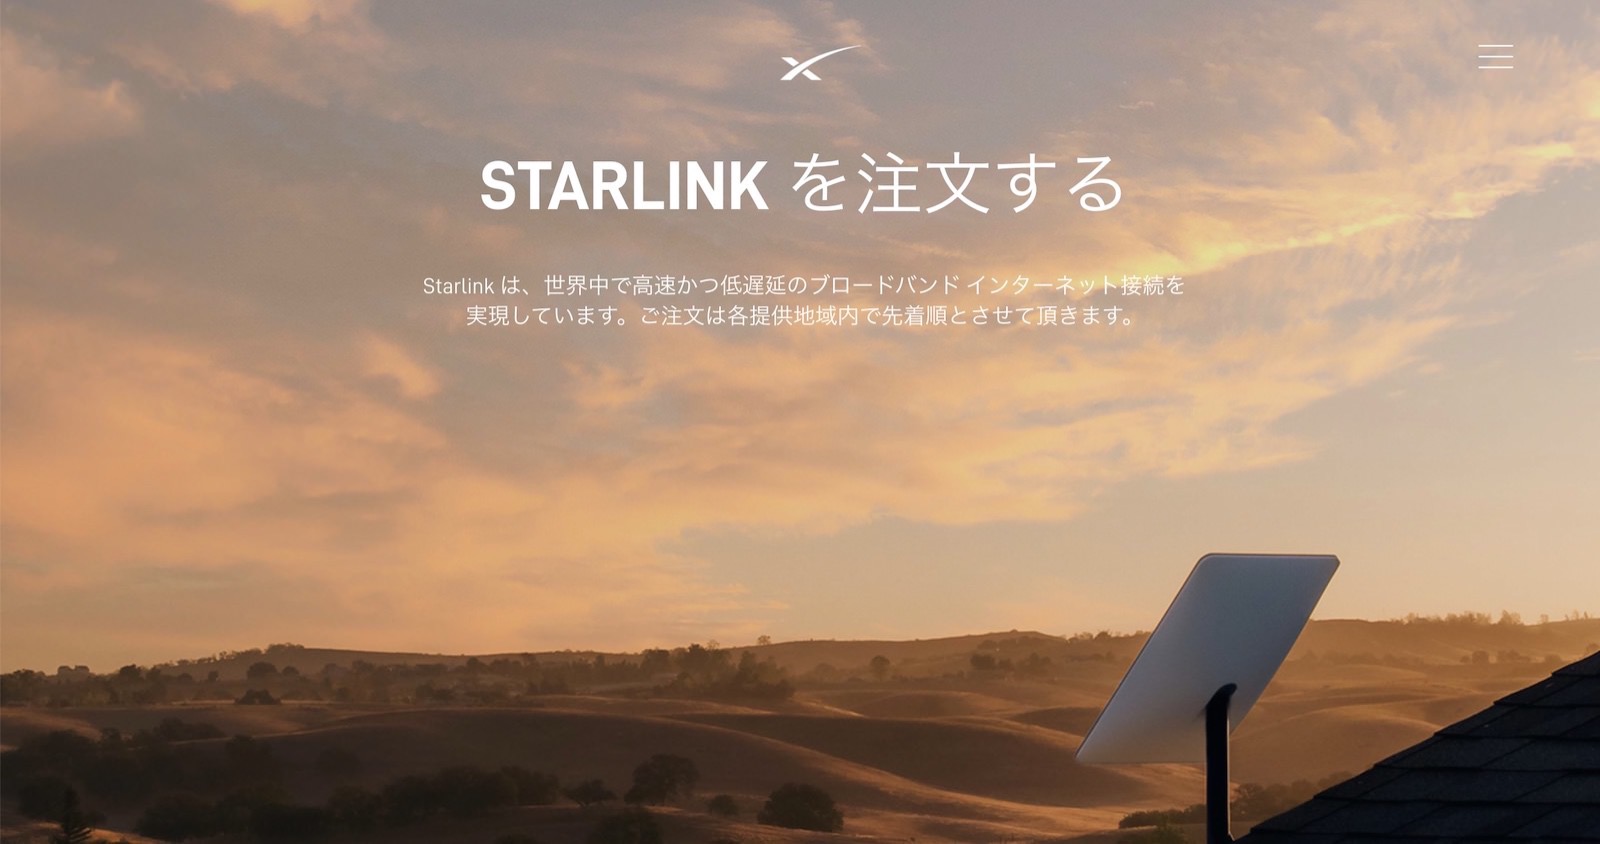 Starlink Japan Official Page